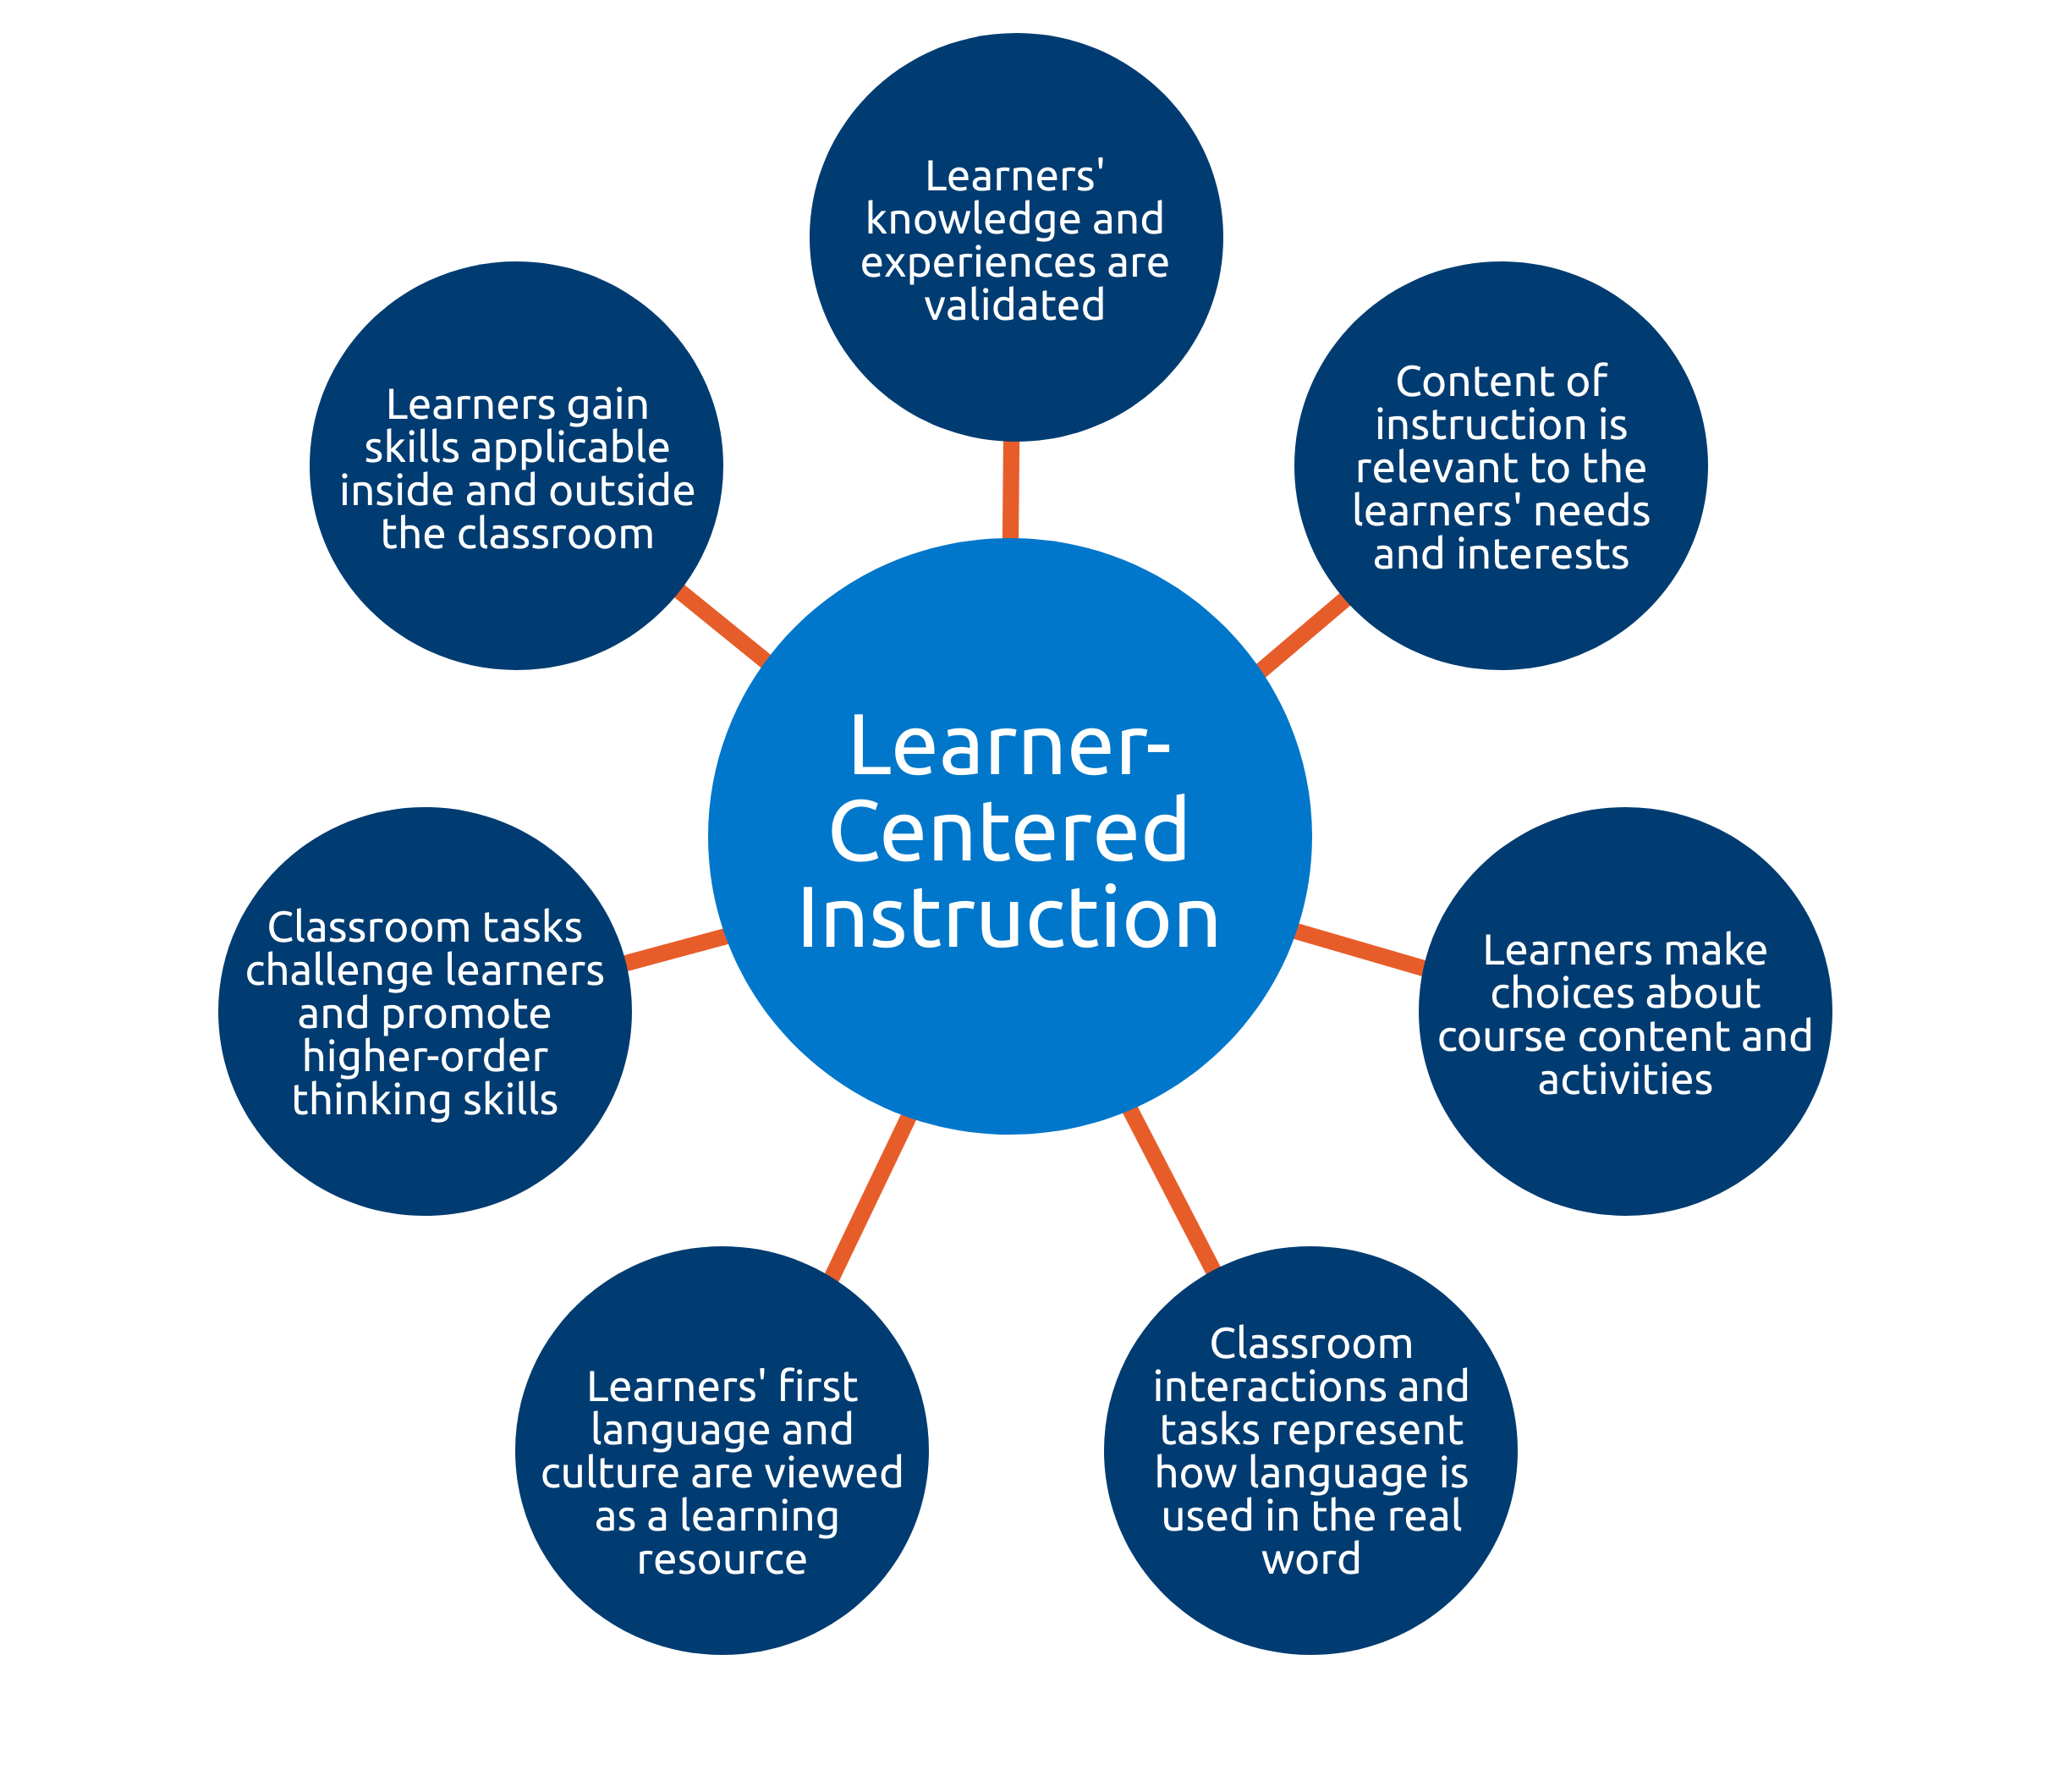 Overview of learner-centered instruction